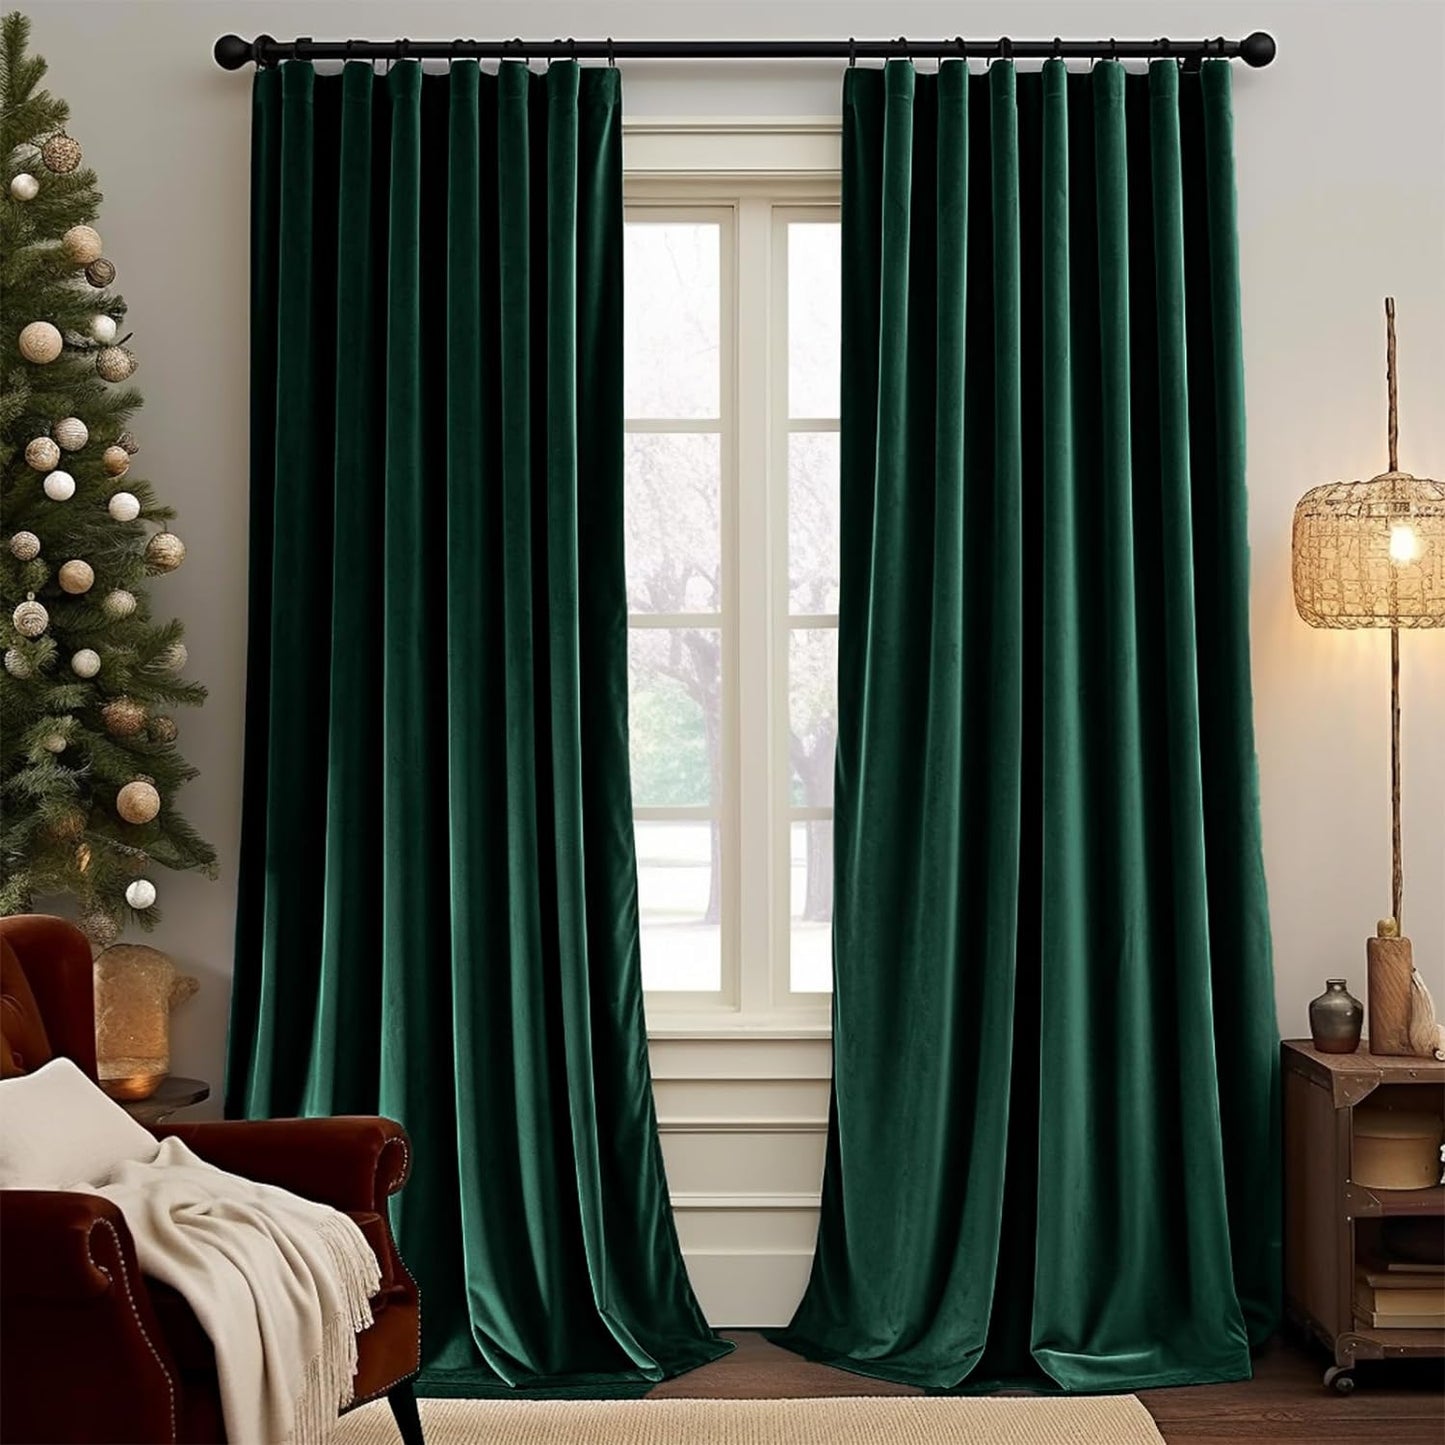 Lazzzy Brown Velvet Blackout Curtain Thermal Insulated Curtain Soft Luxury Noise Reducing Velvet Window Drape for Kids Bedroom Living Room Darkening Drape 96 Inch Long 1 Panel Gold Brown  TOPICK Emerald Green W52 X L96 